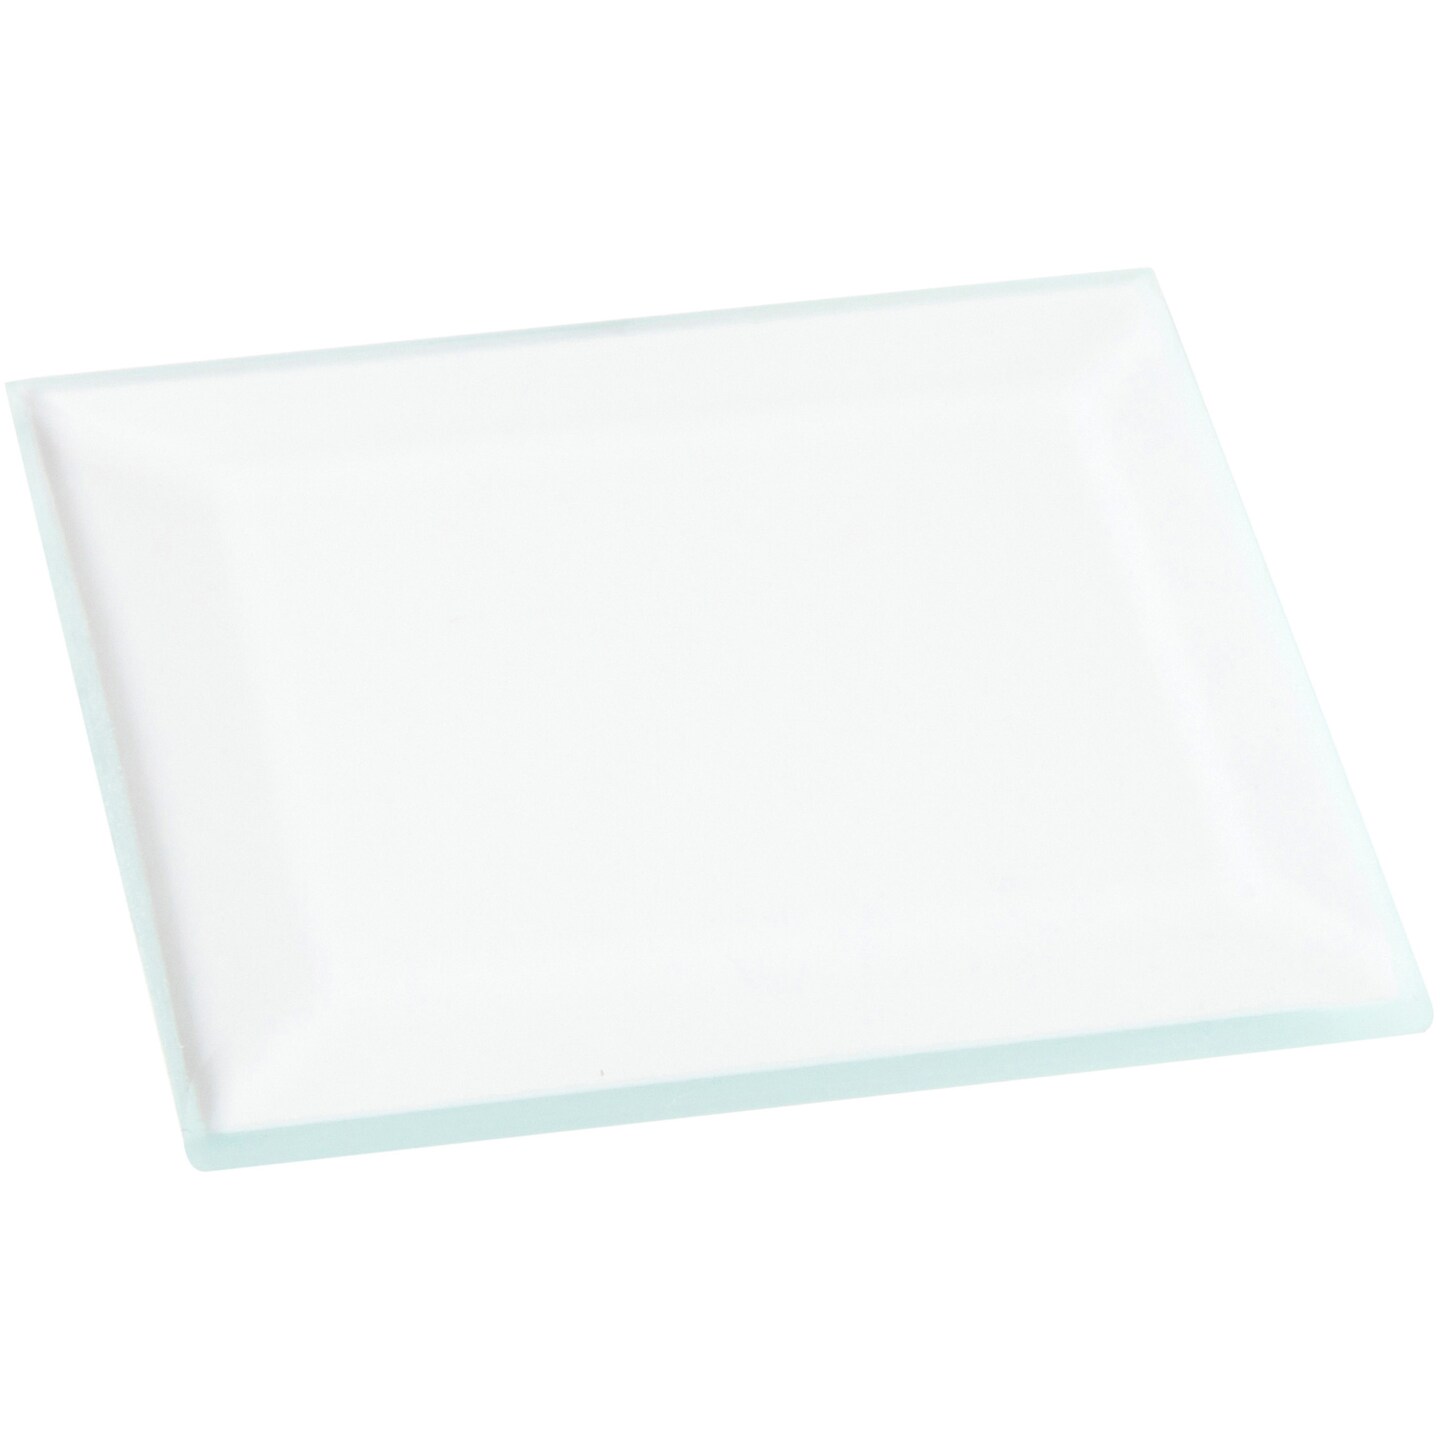 Plymor Square 3mm Beveled Clear Glass, 1.5 inch x 1.5 inch